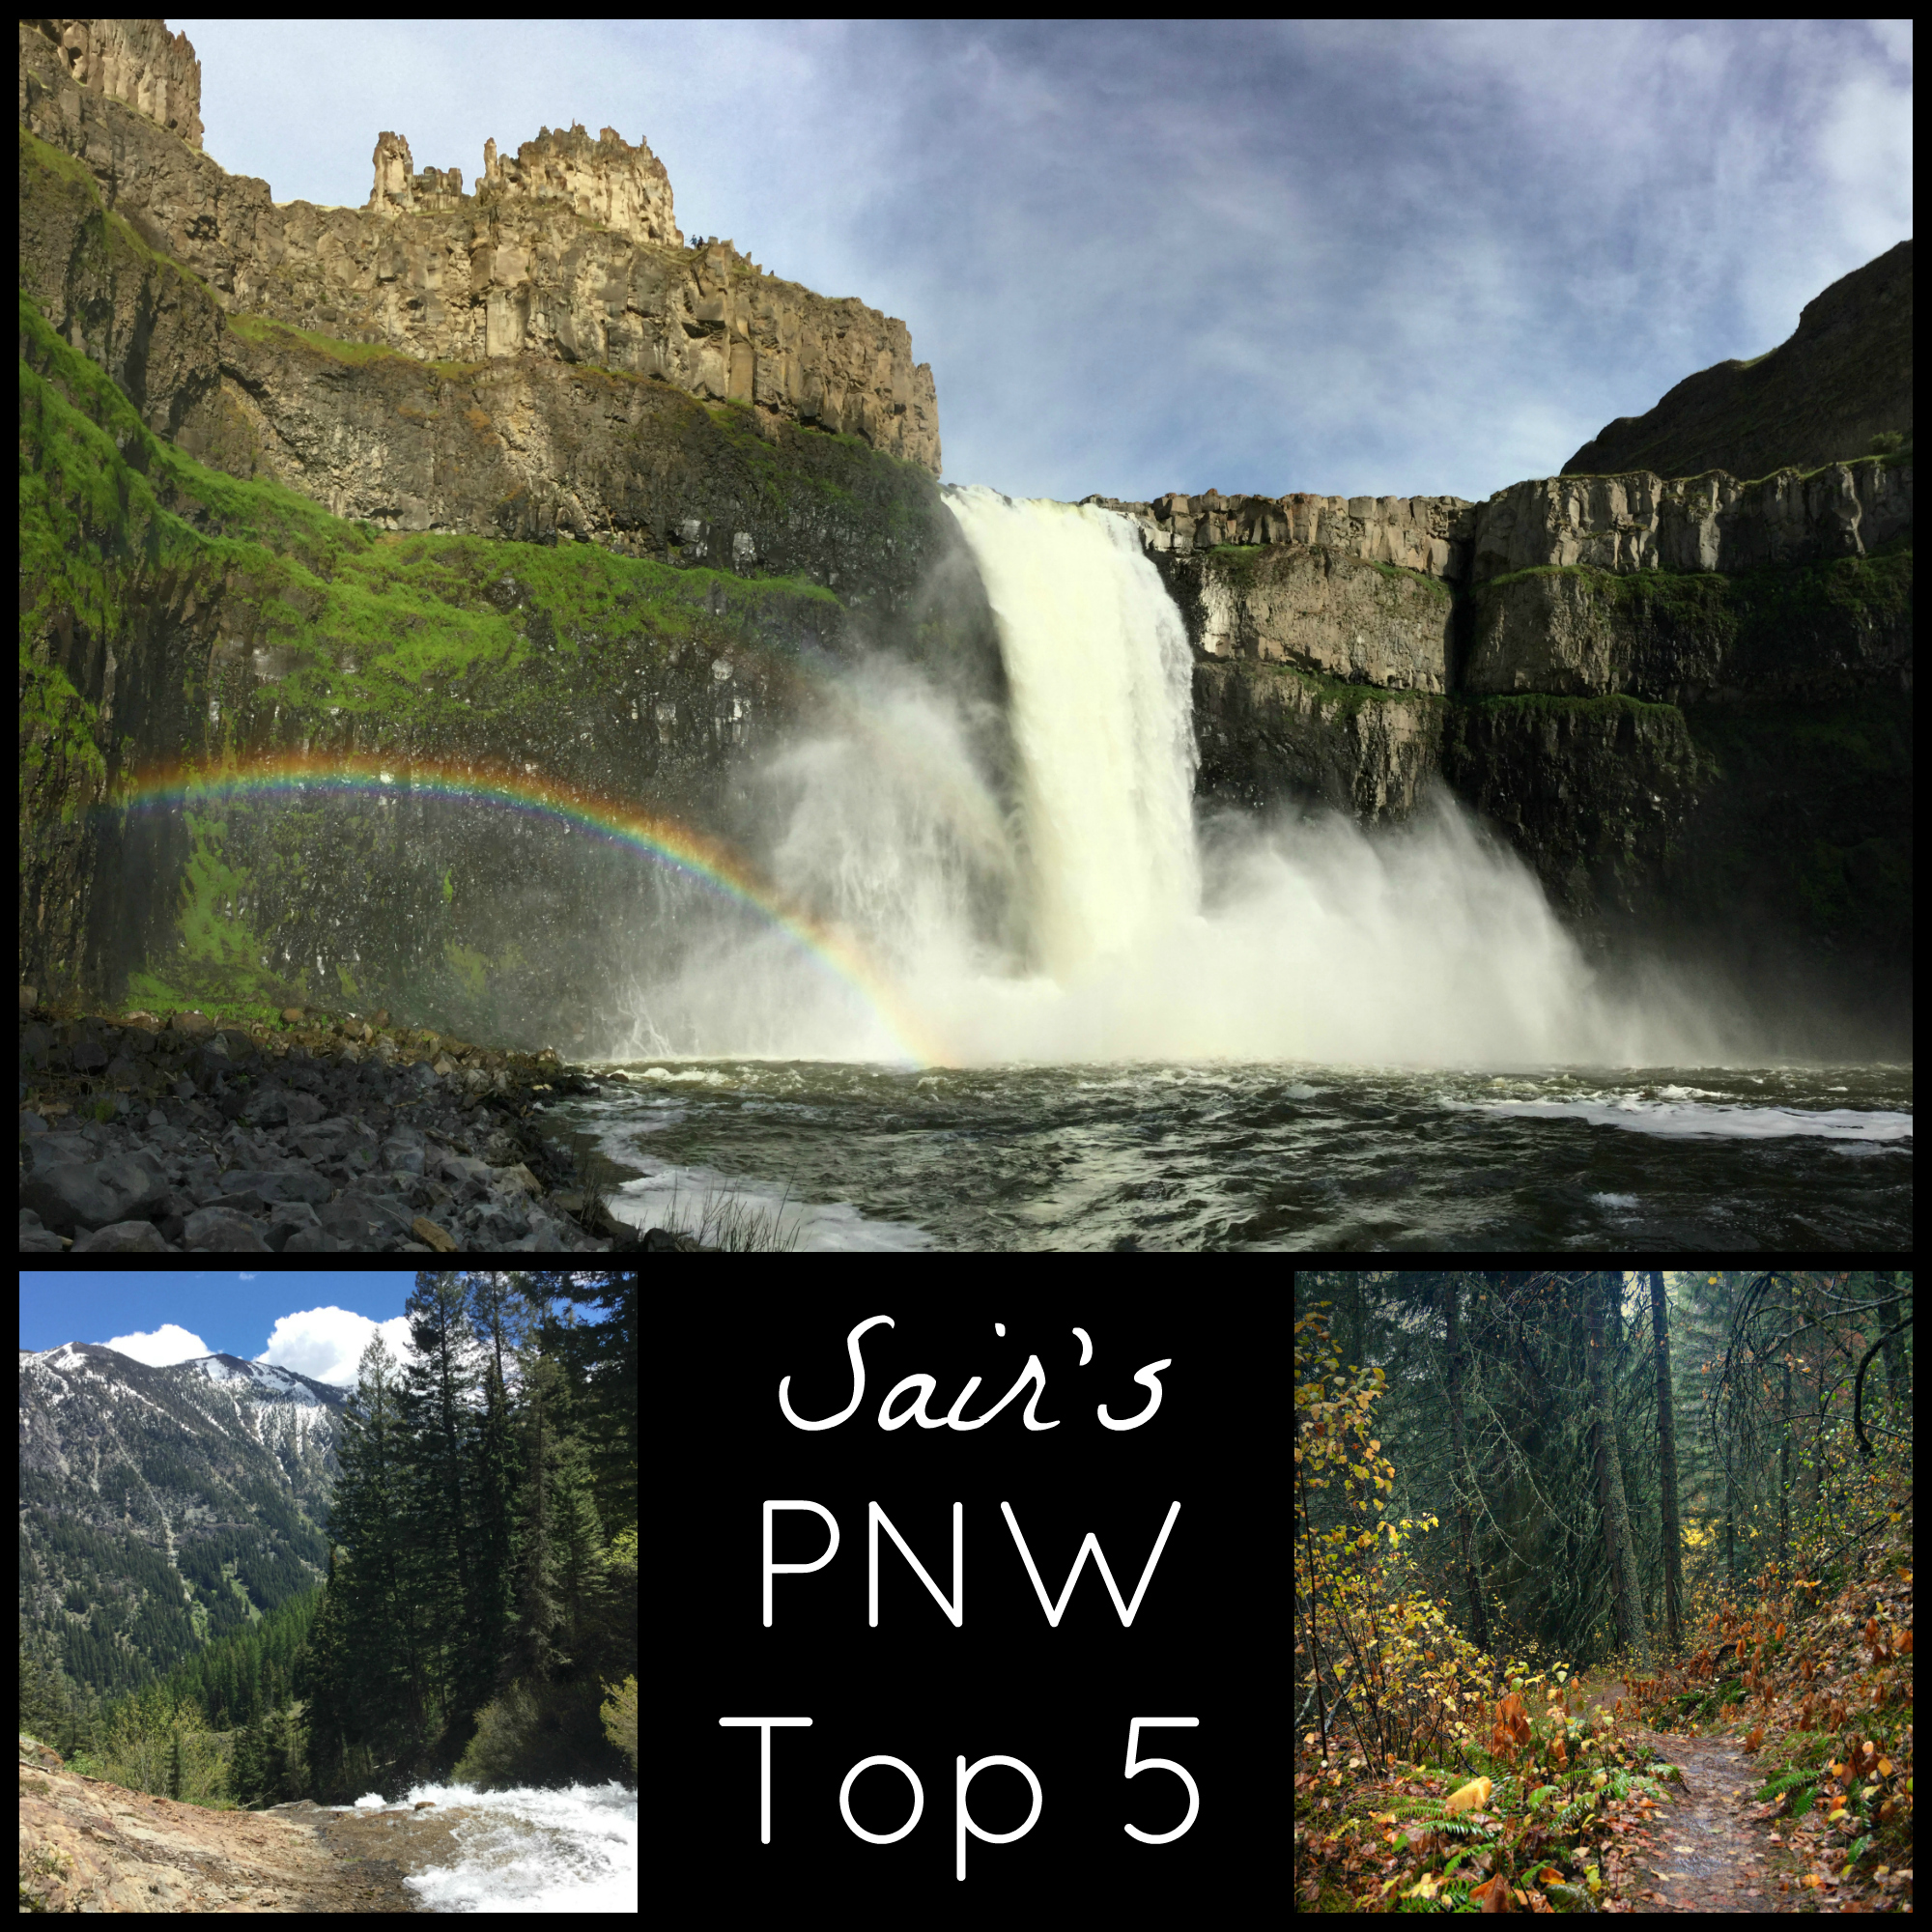 Visit My Top 5 Hikes at The World Wanderers!